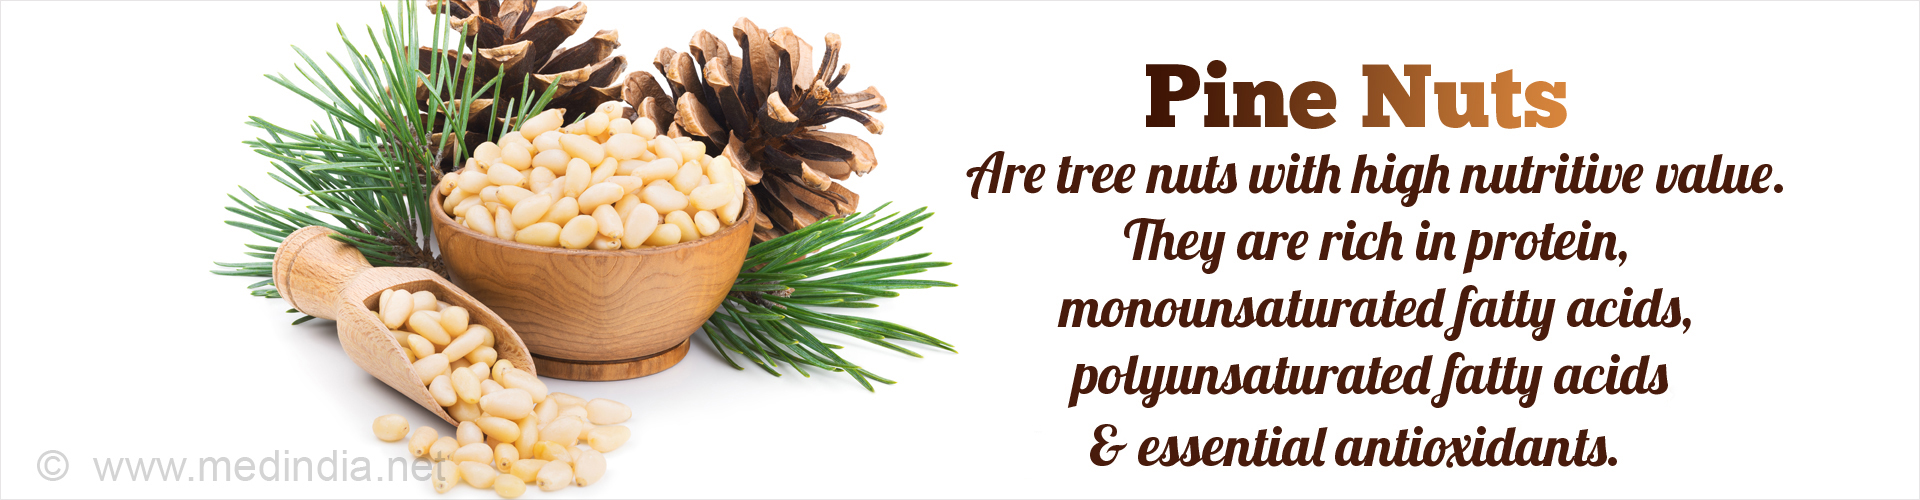 Pine nuts are tree nuts with high nutritive value. They are rich in monounsaturated fatty acids, polyunsaturated fatty acids, protein and essential antioxidants